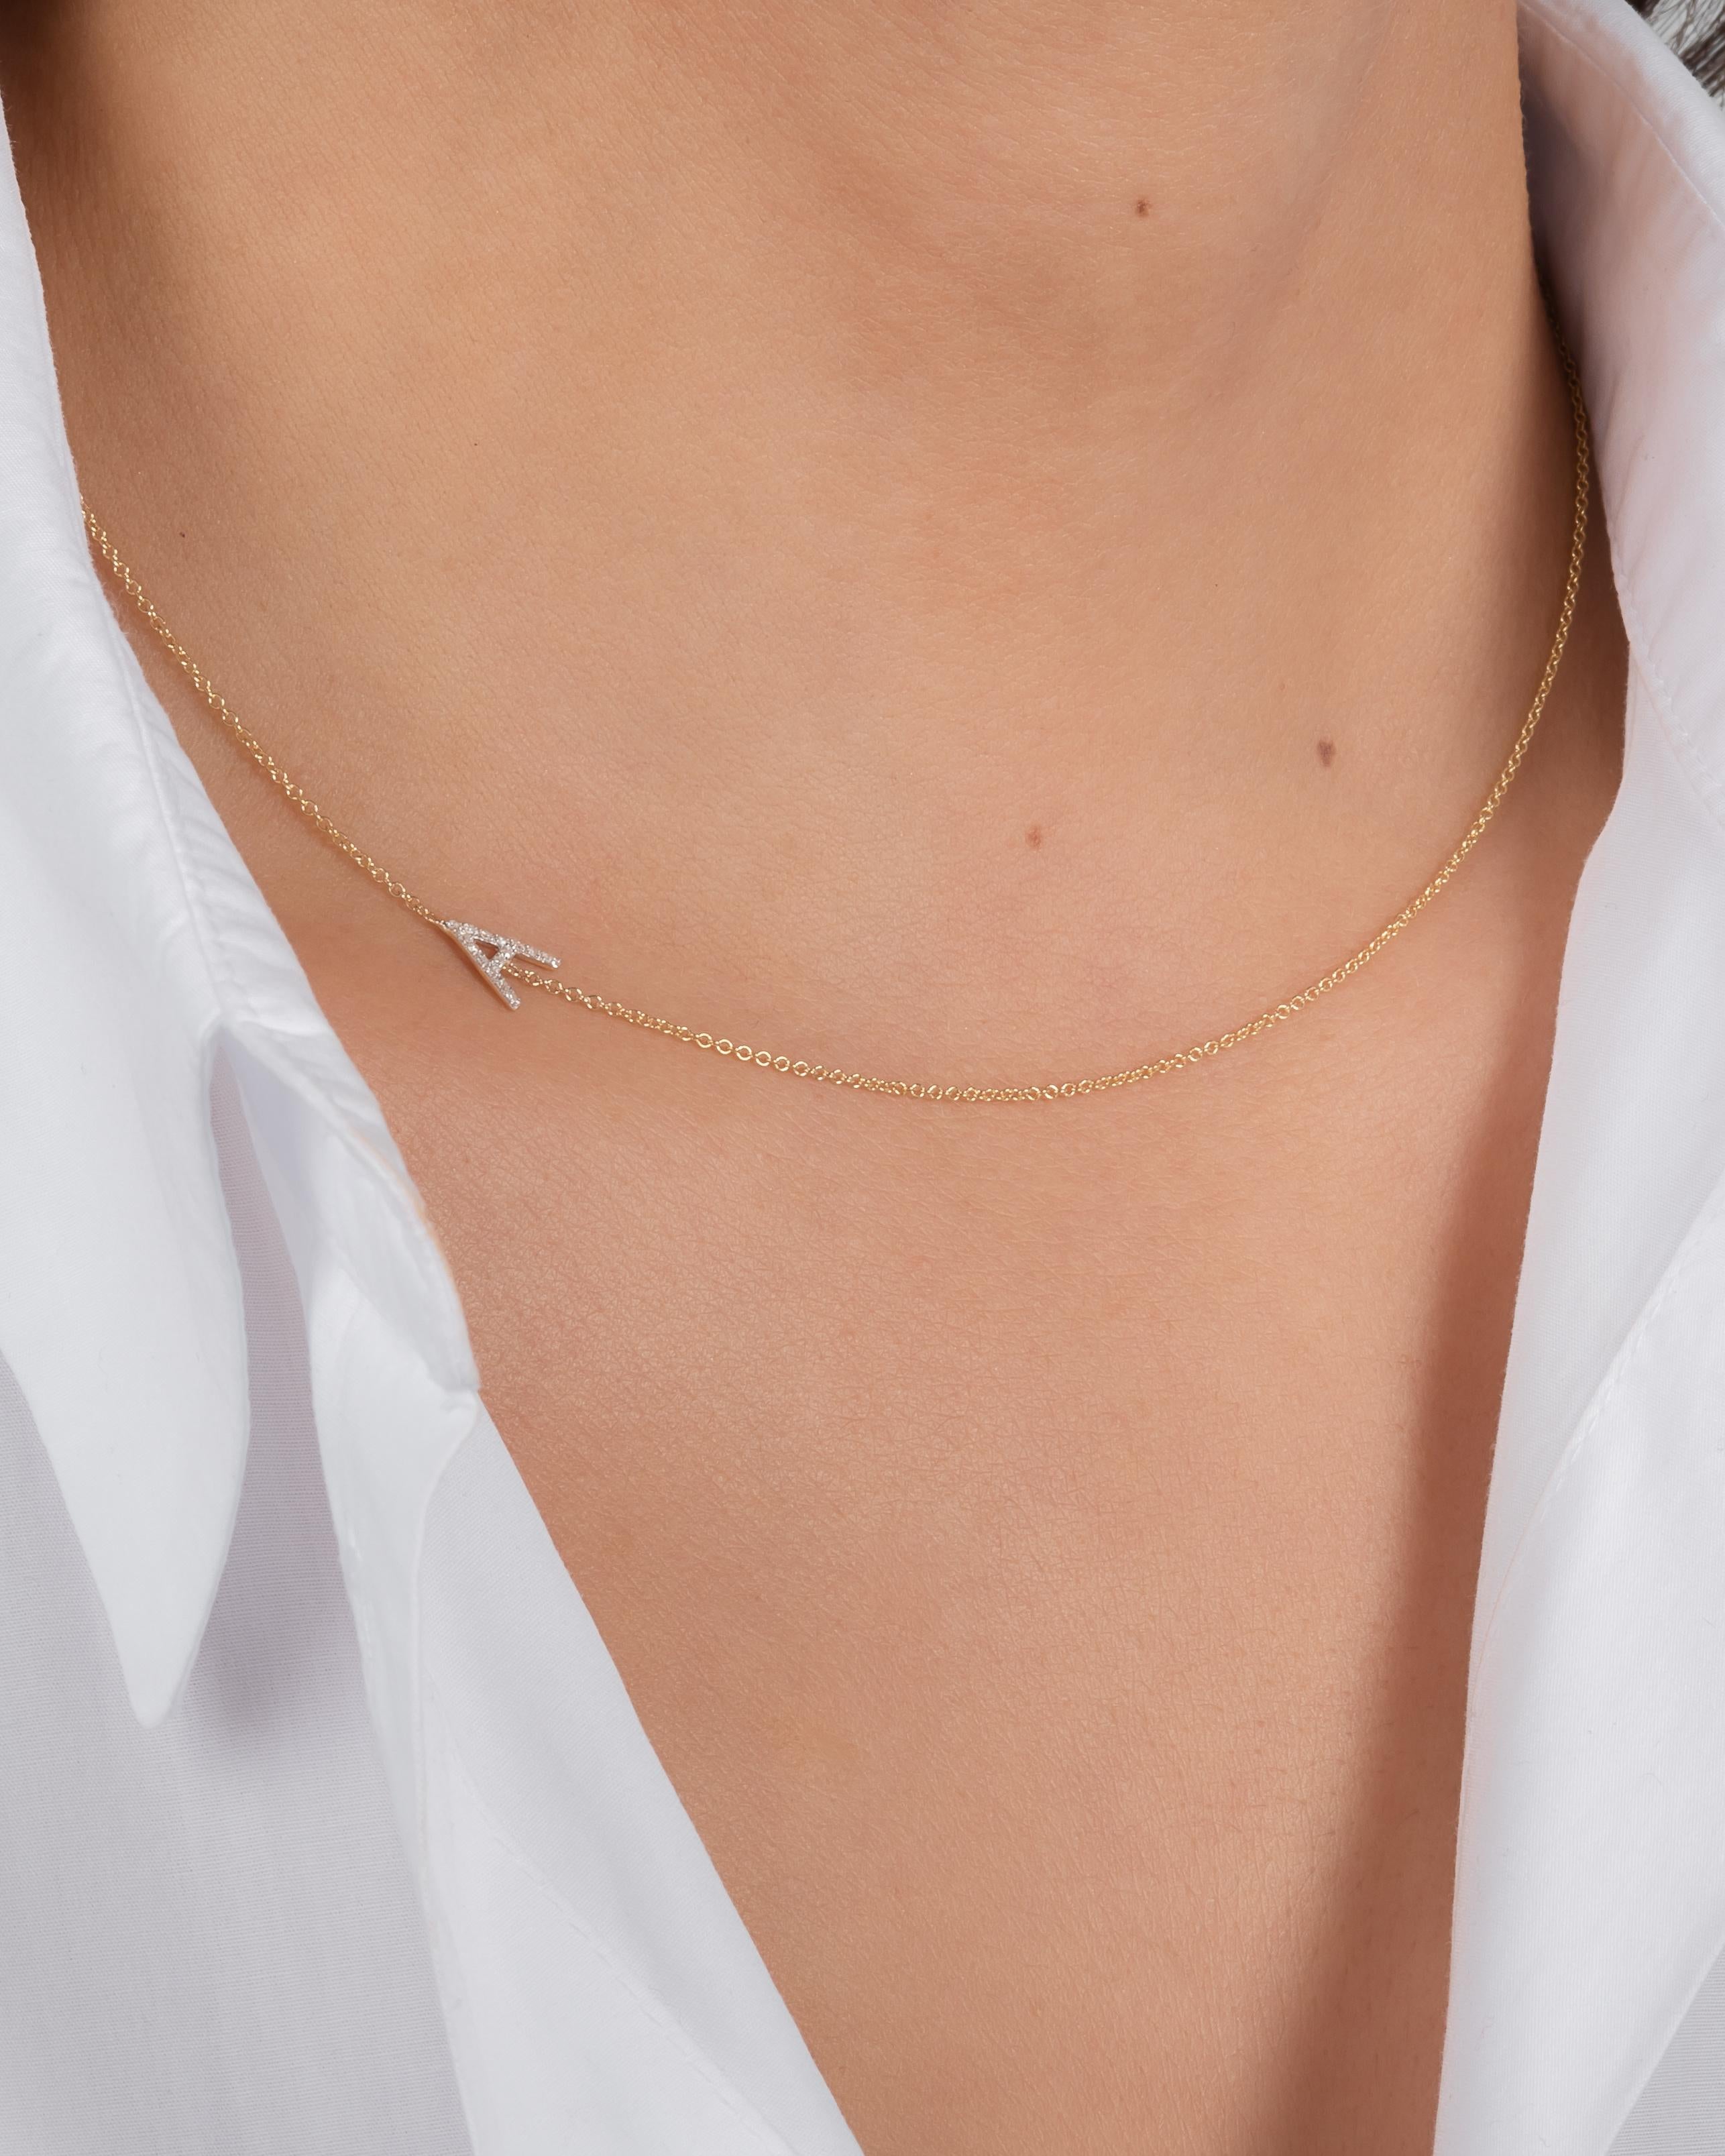 14k solid gold pave diamond asymmetrical initial on a dainty chain necklace with the length of your choice, in 14k yellow Gold, adjustable length of 16